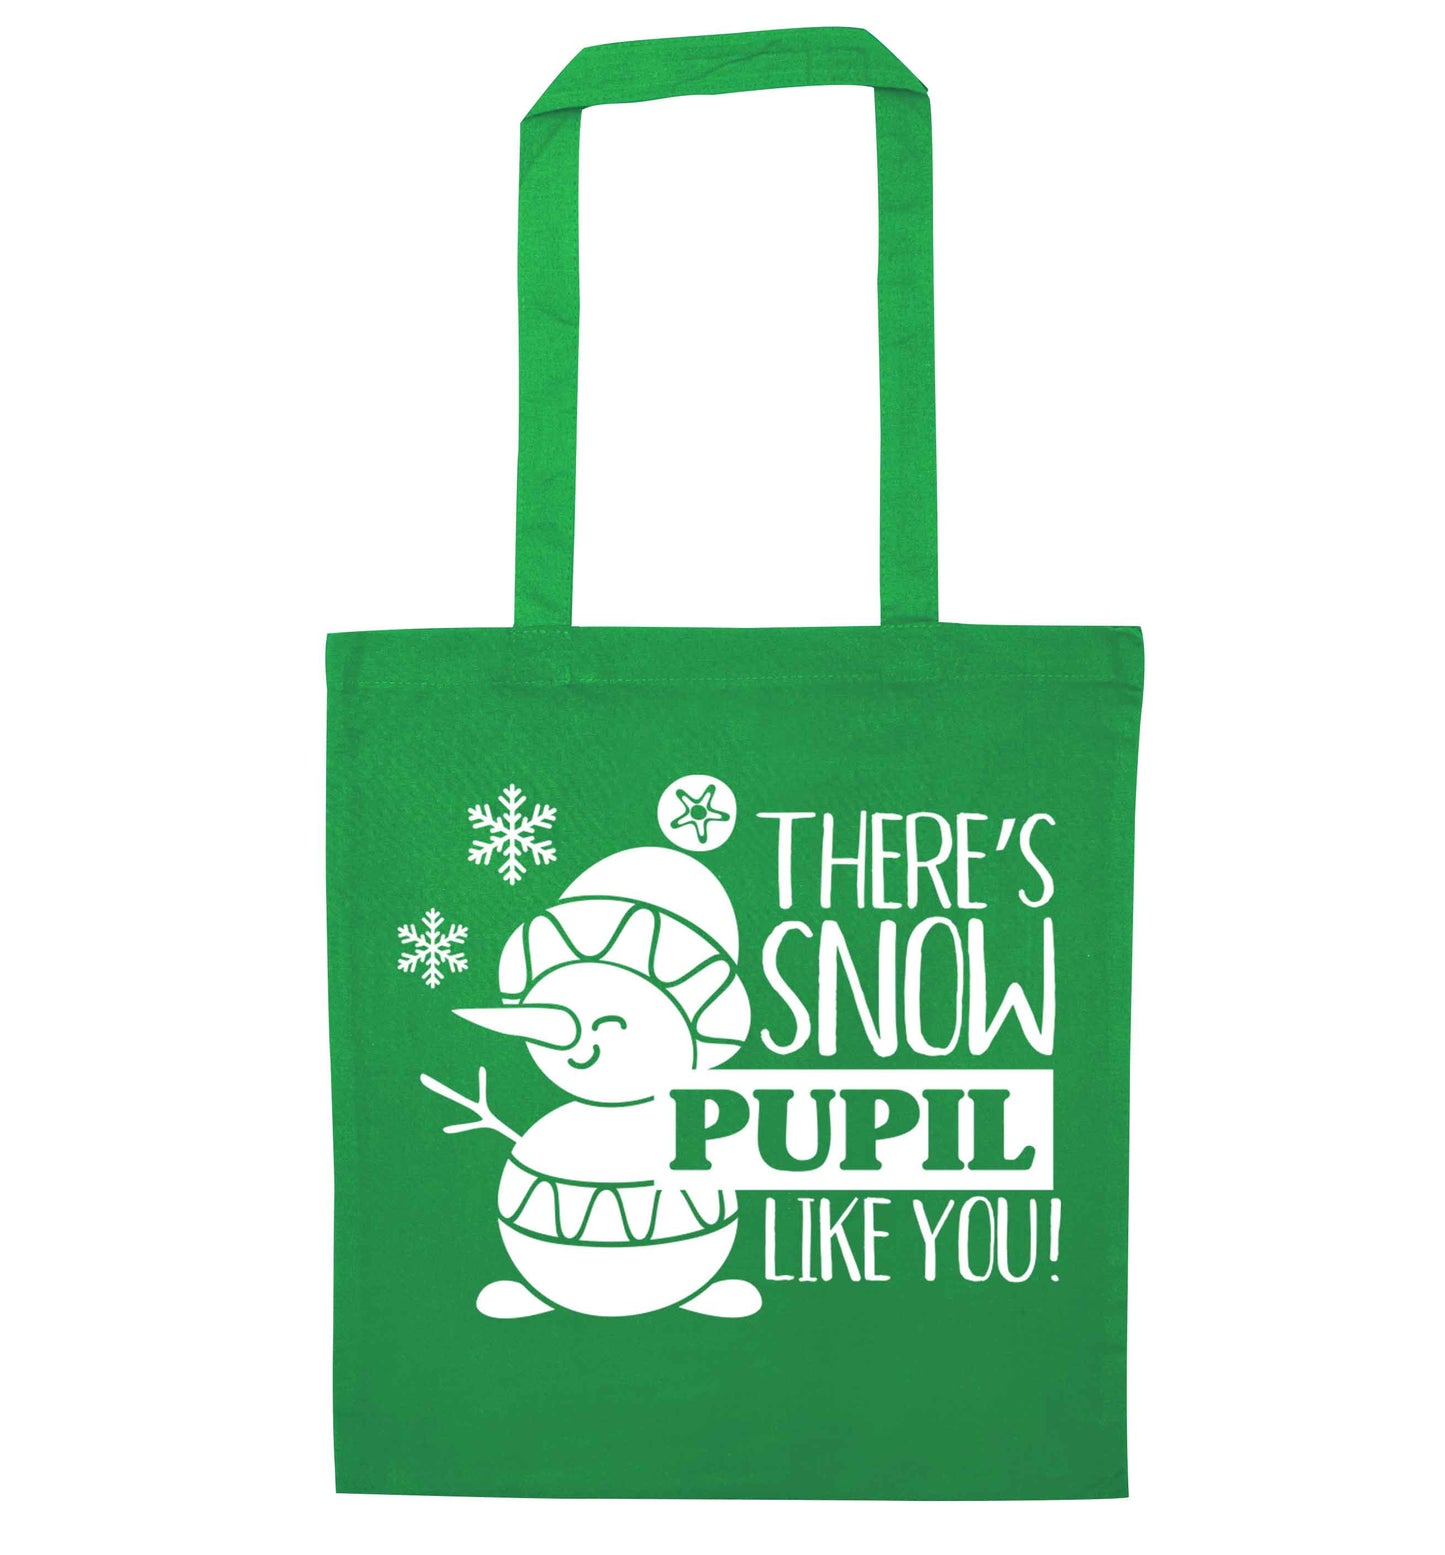 There's snow pupil like you green tote bag